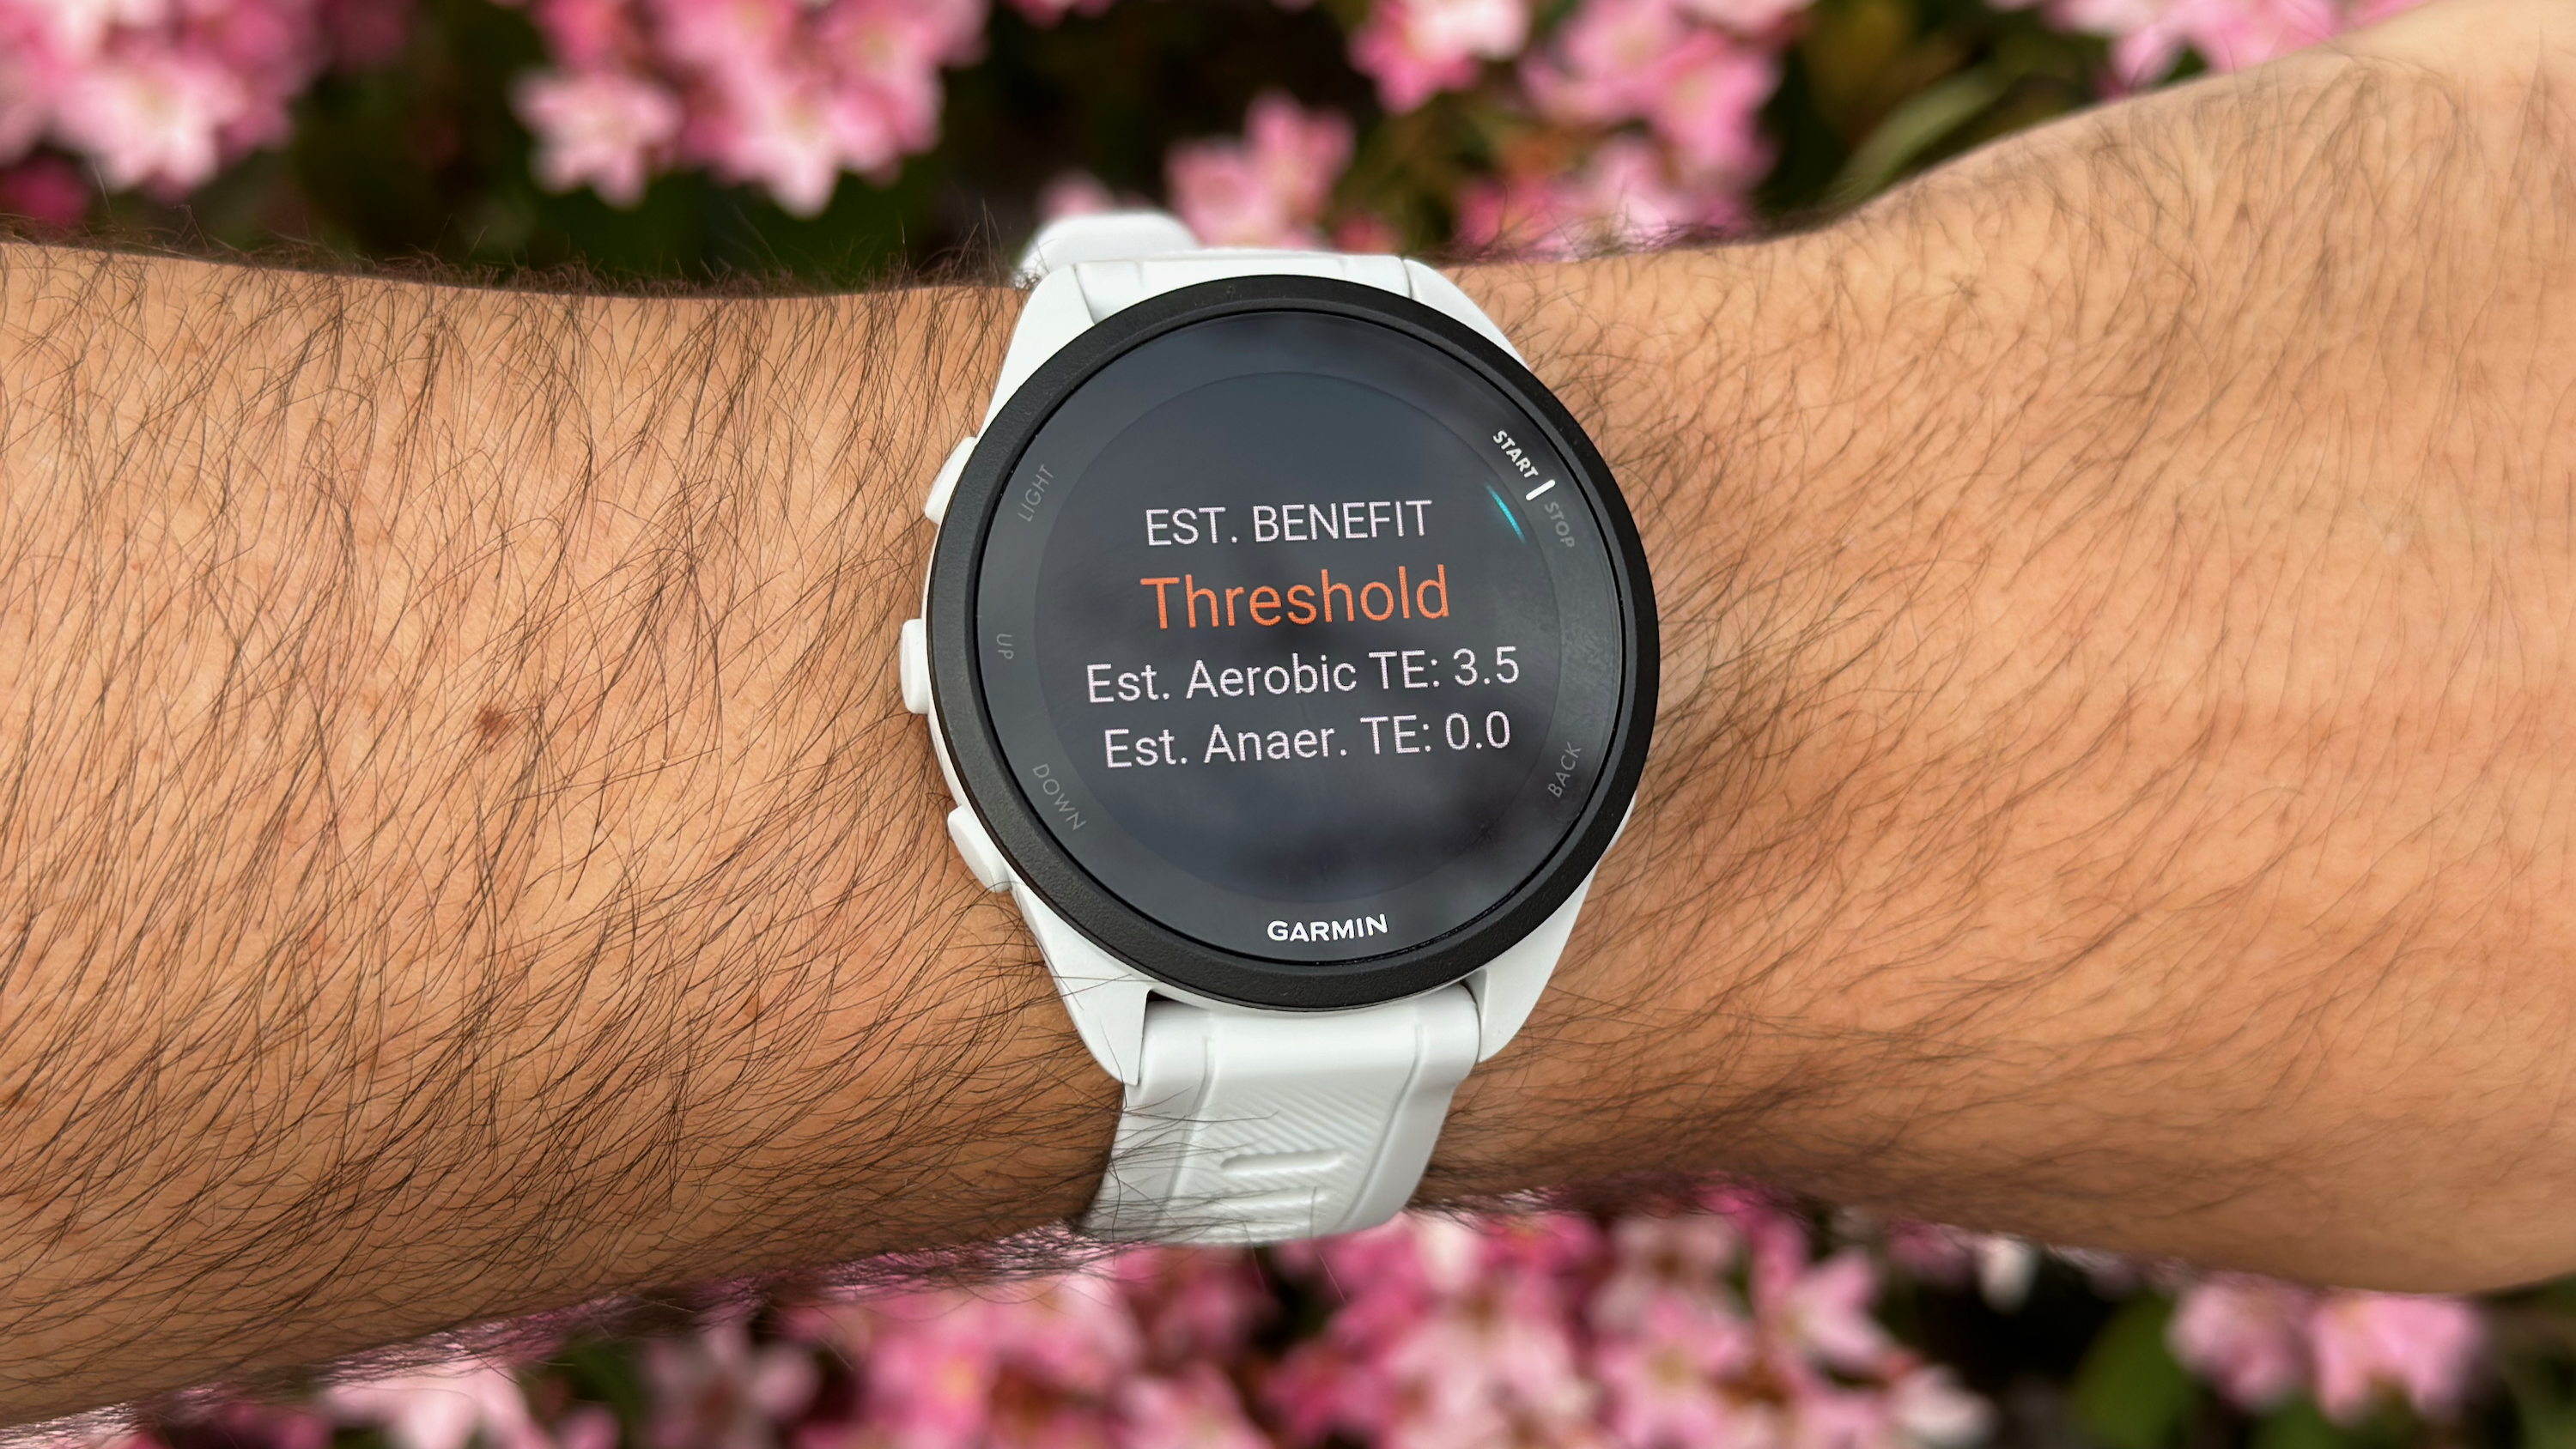 The estimated workout benefit for a daily suggested workout on the Garmin Forerunner 165.